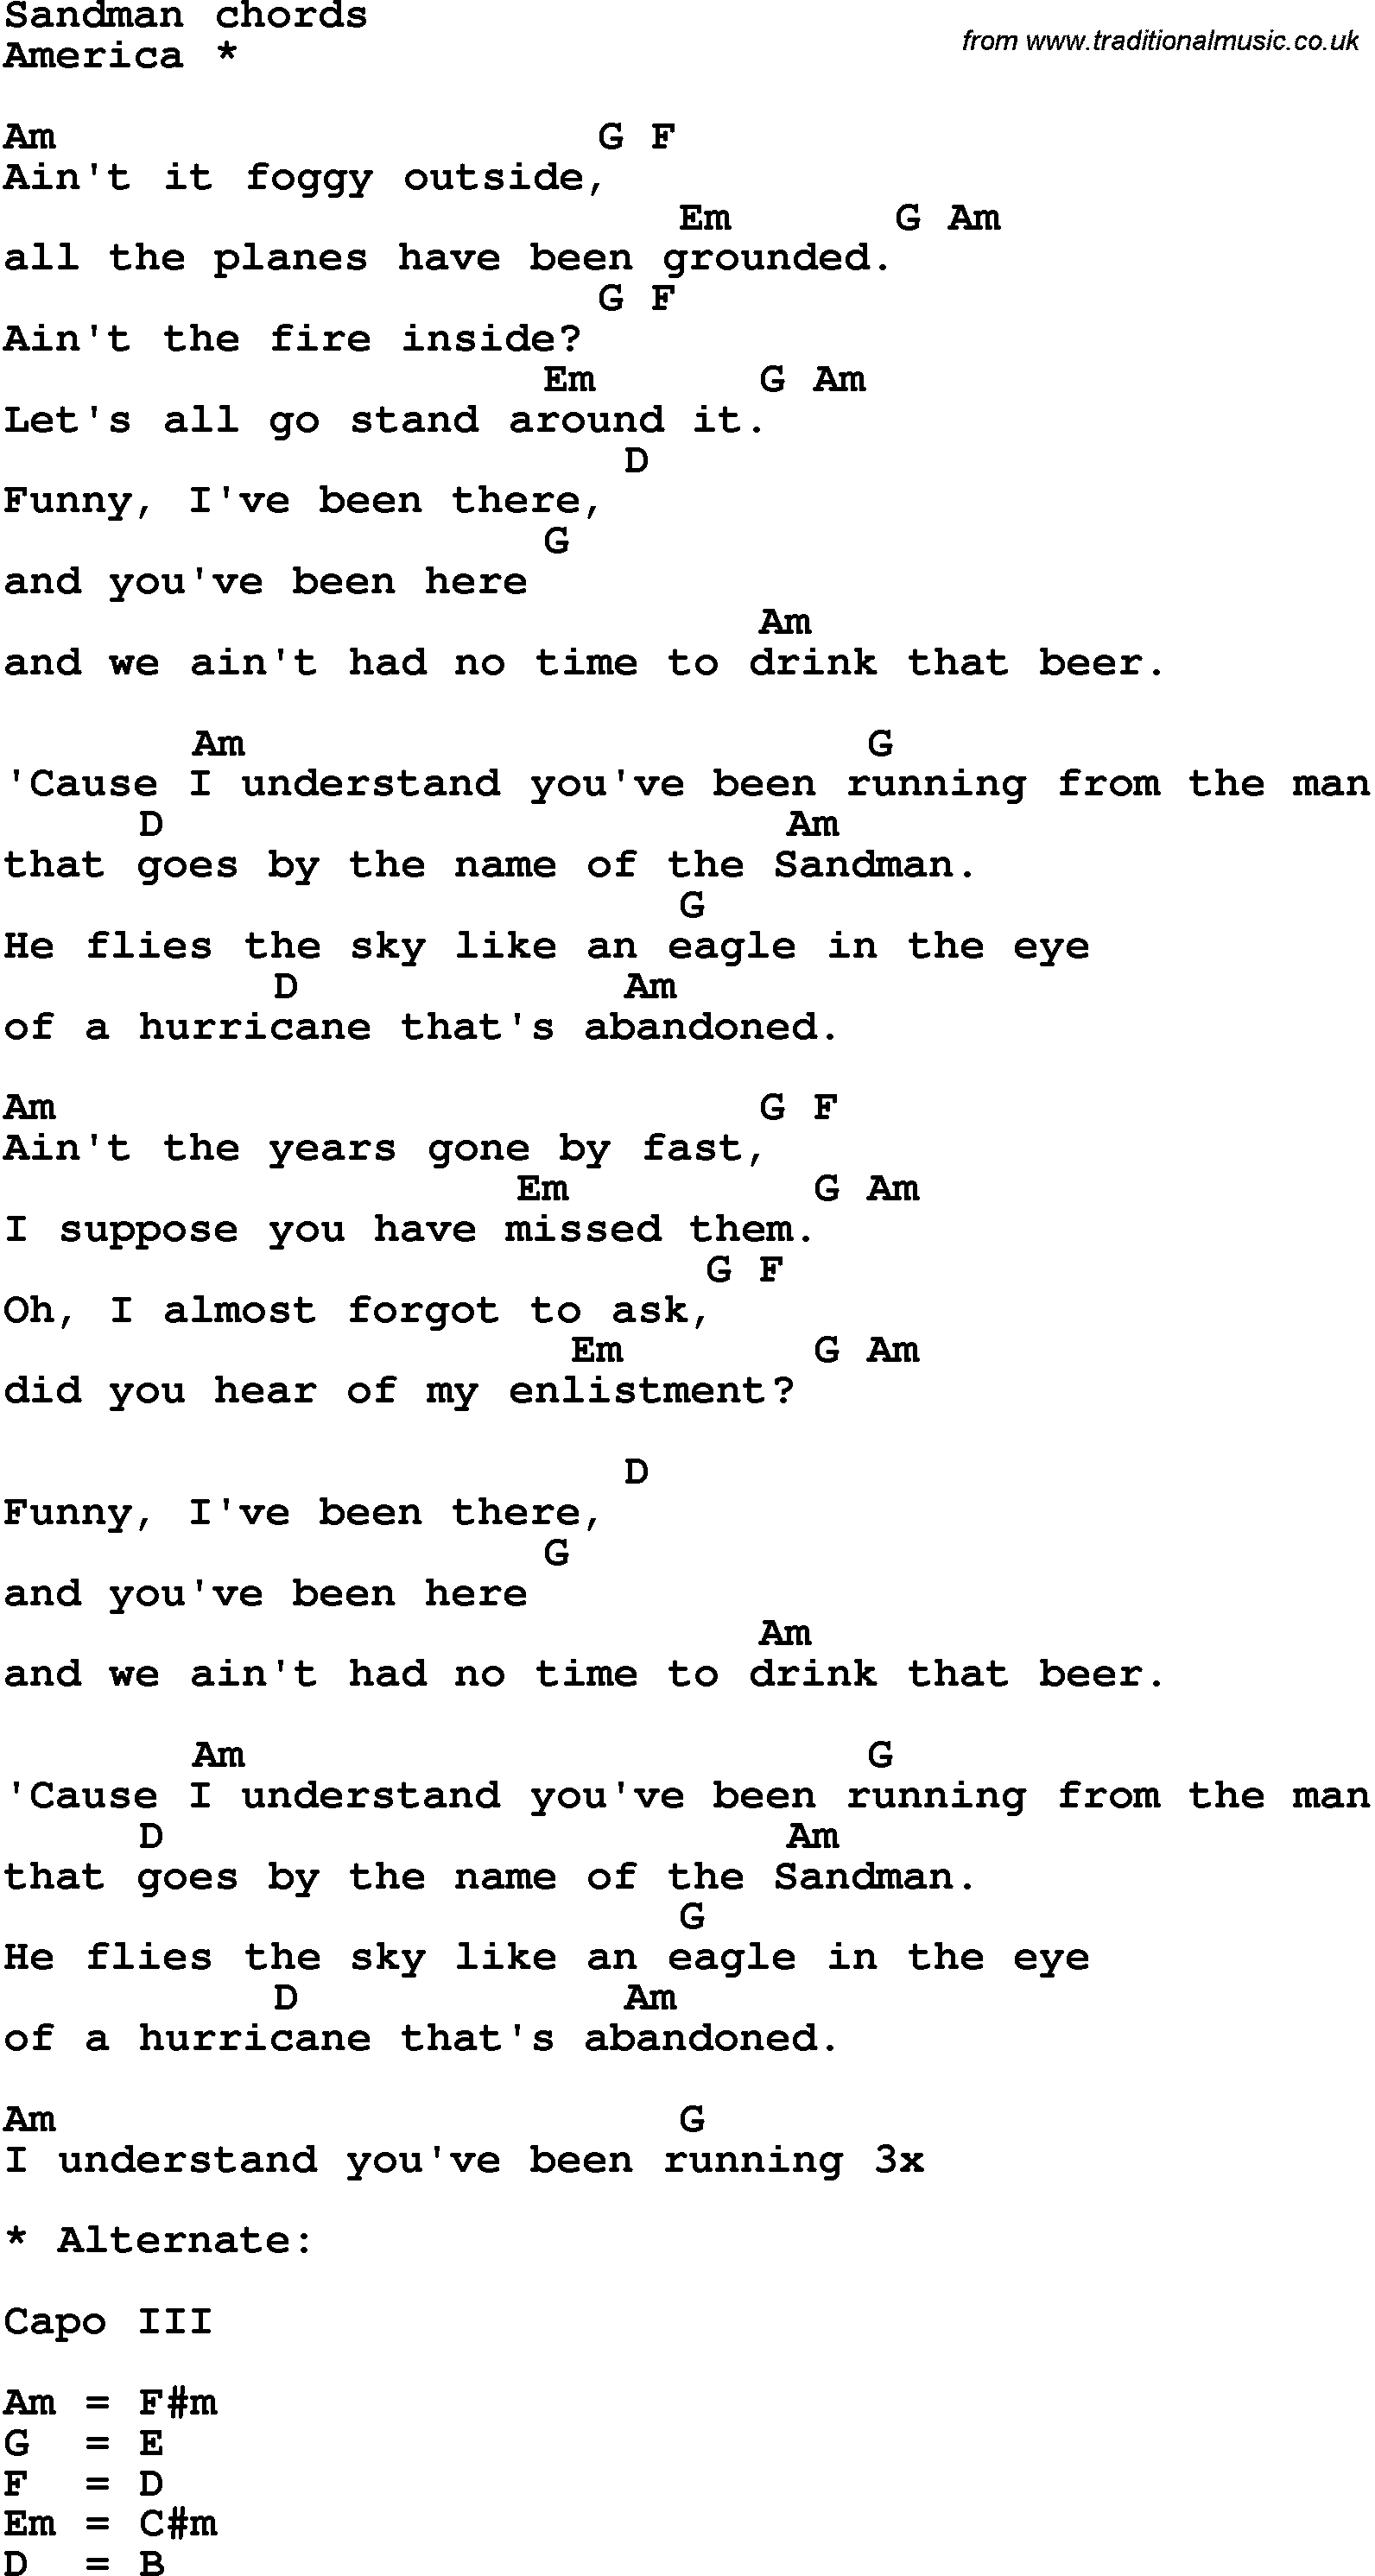 Song Lyrics with guitar chords for Sand Man